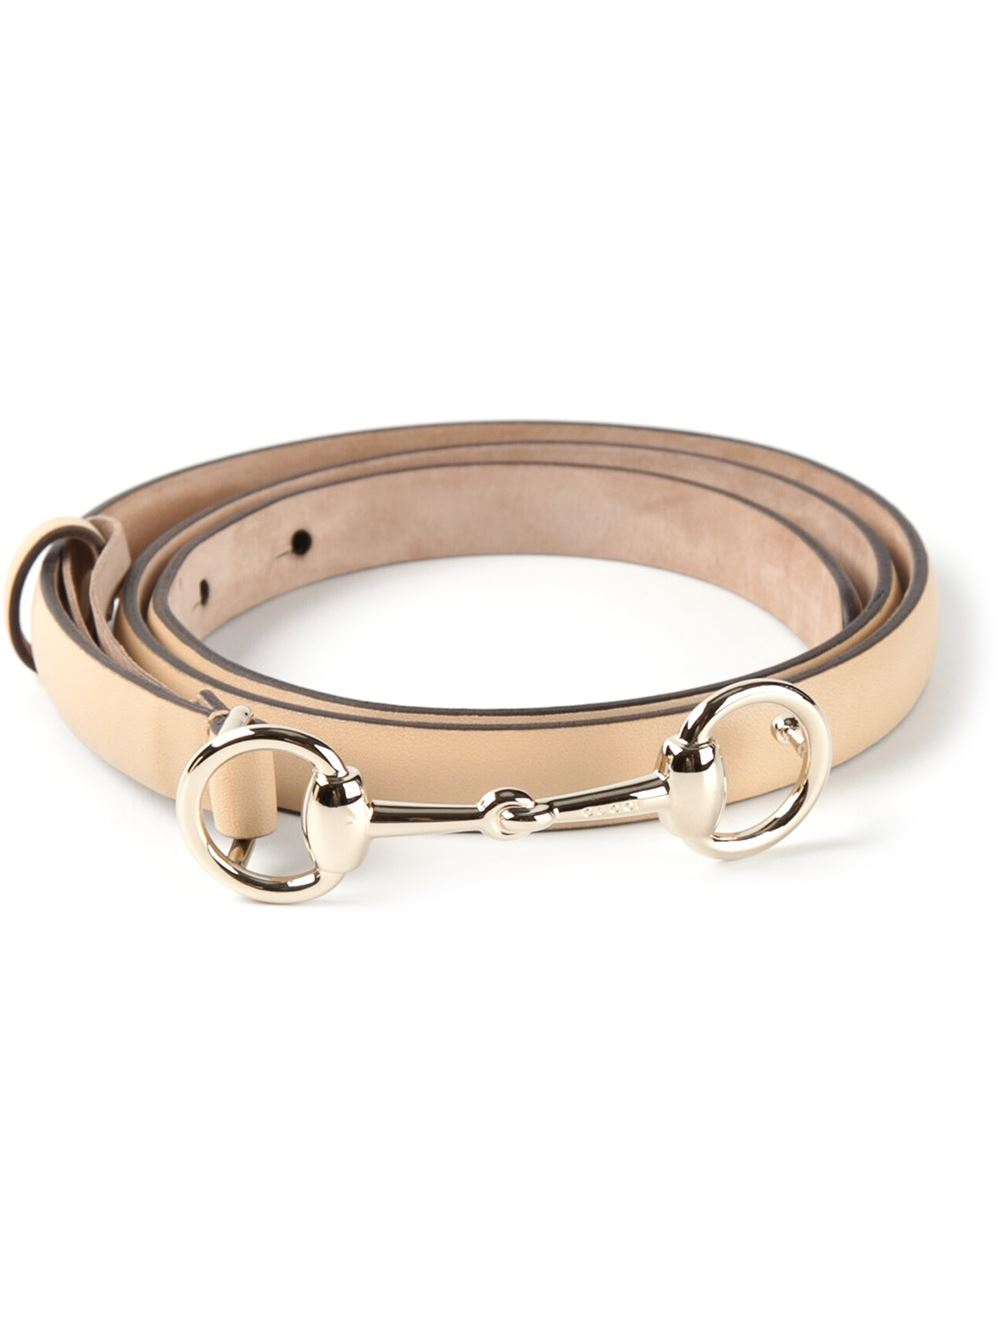 Gucci Thin Belt in Natural | Lyst